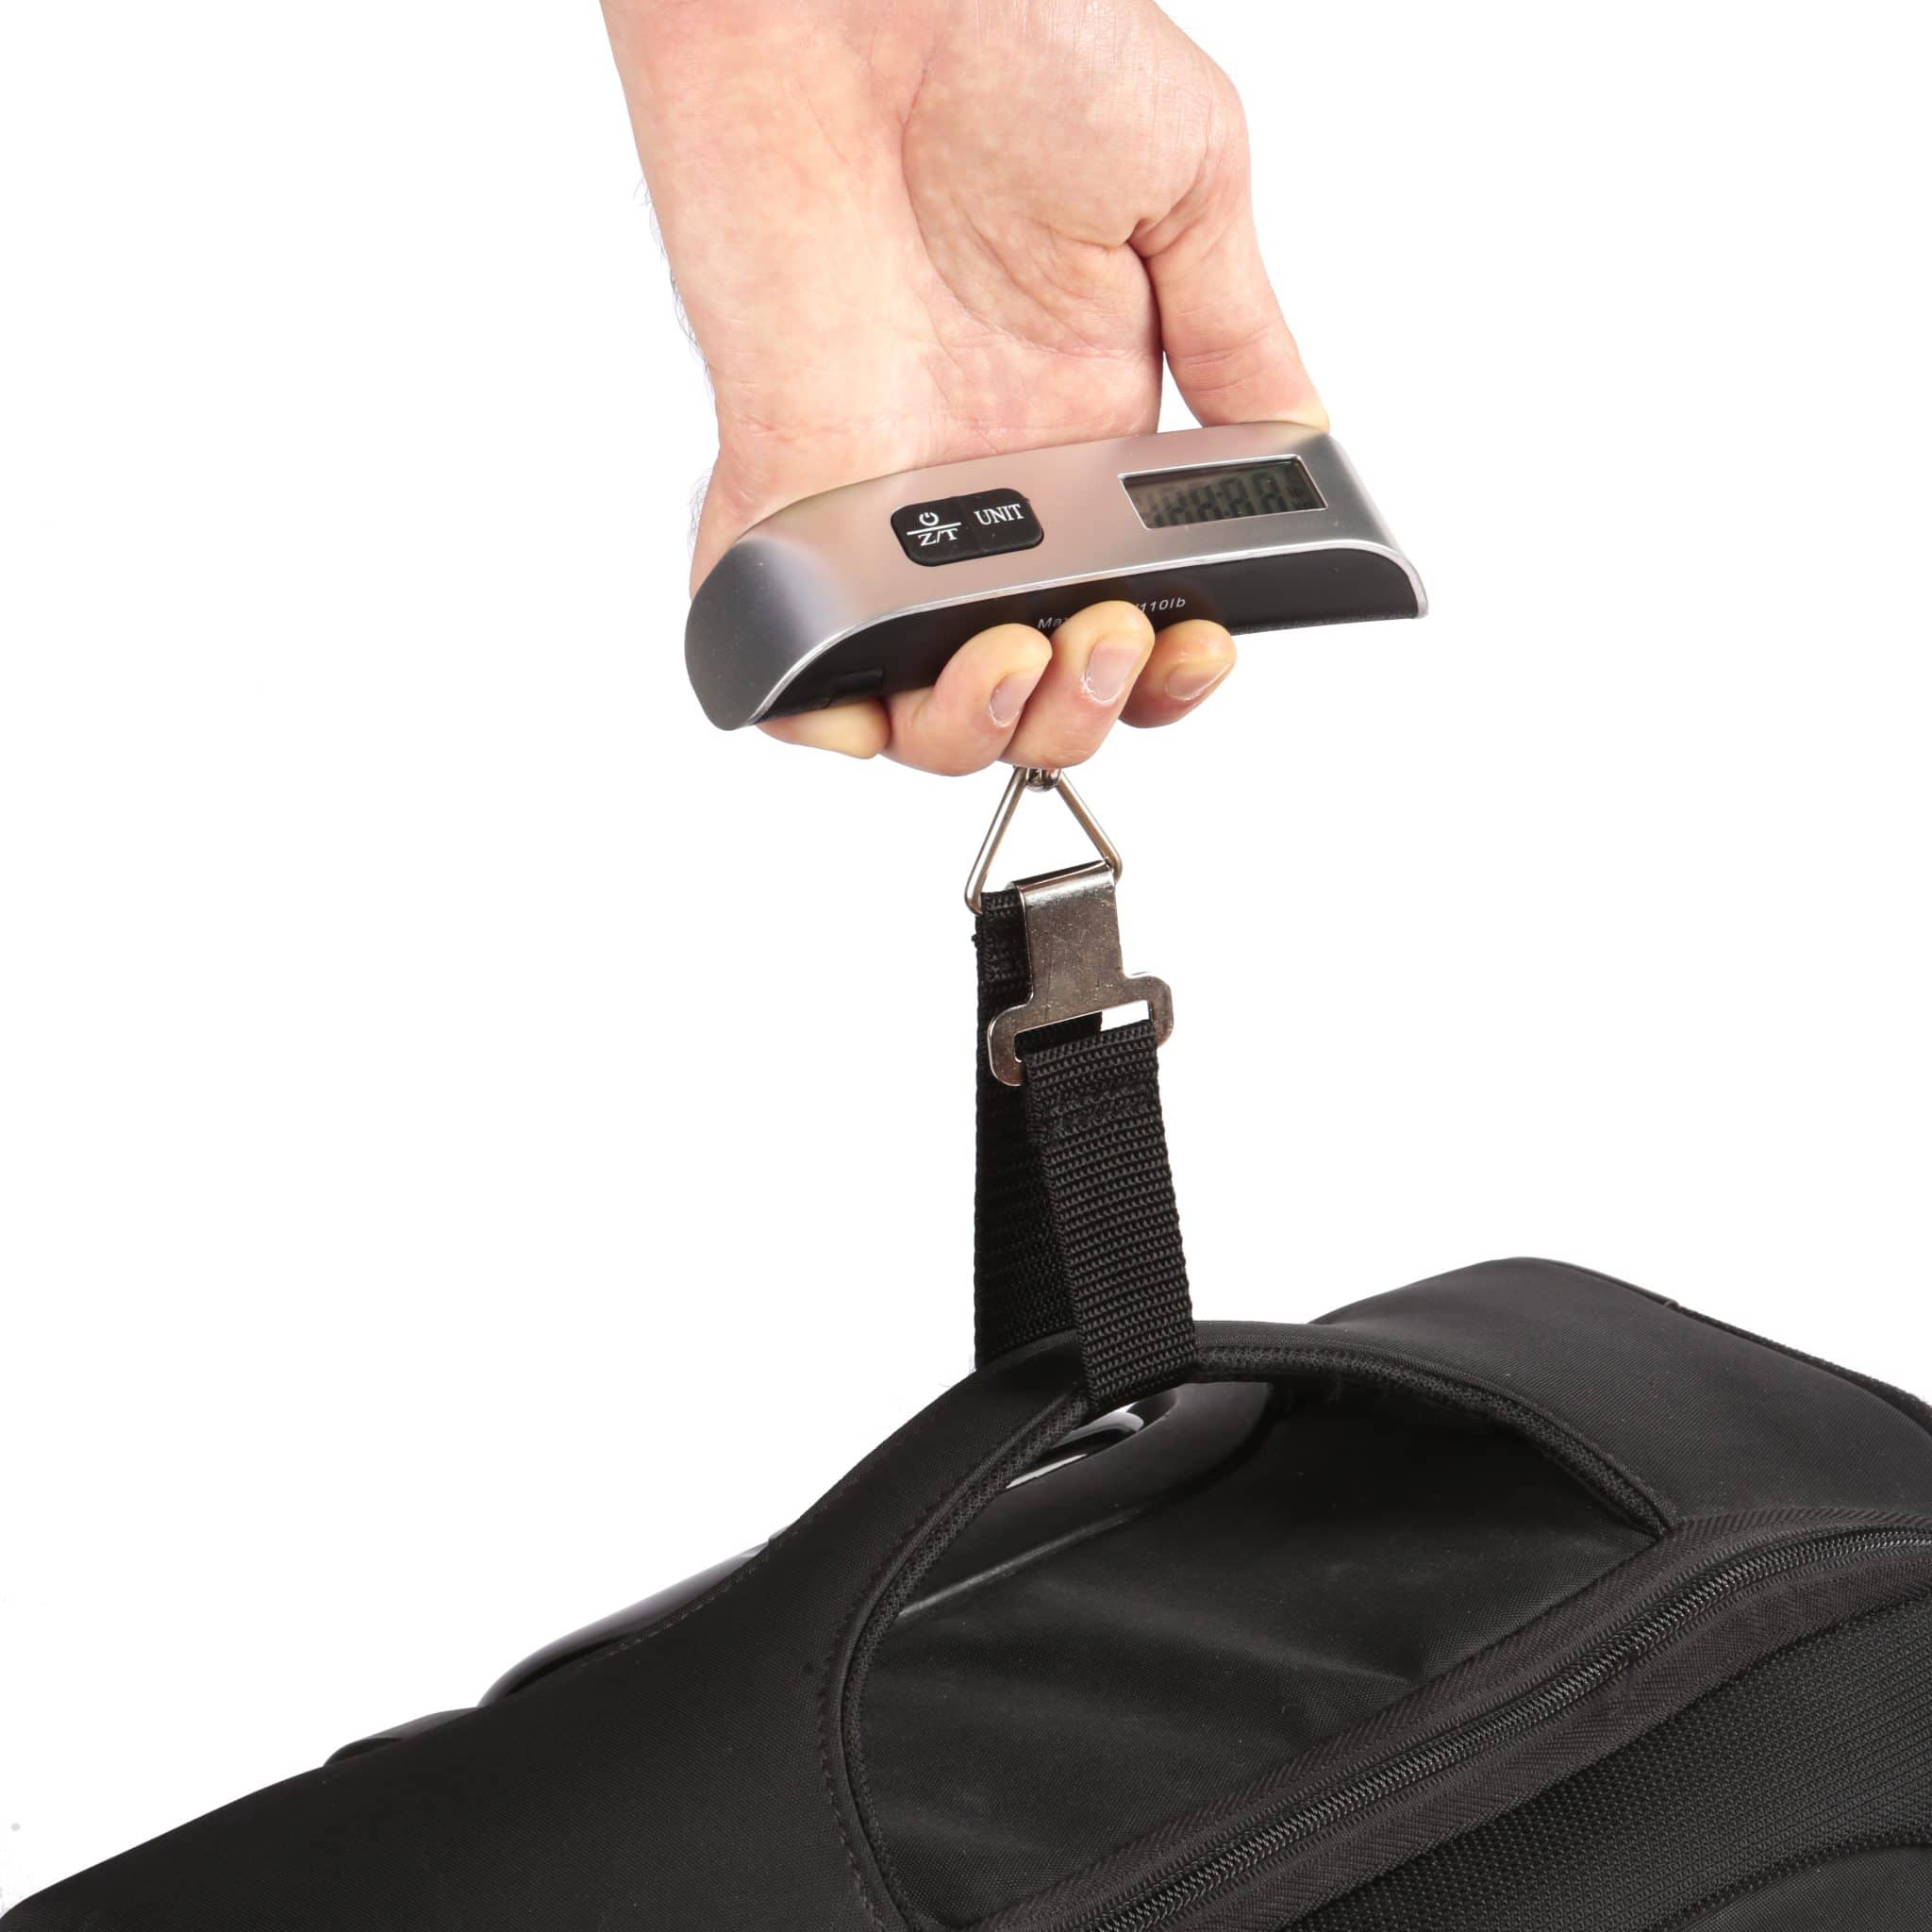 FREETOO Luggage Scale Portable Digital Travel Suitcase Scales